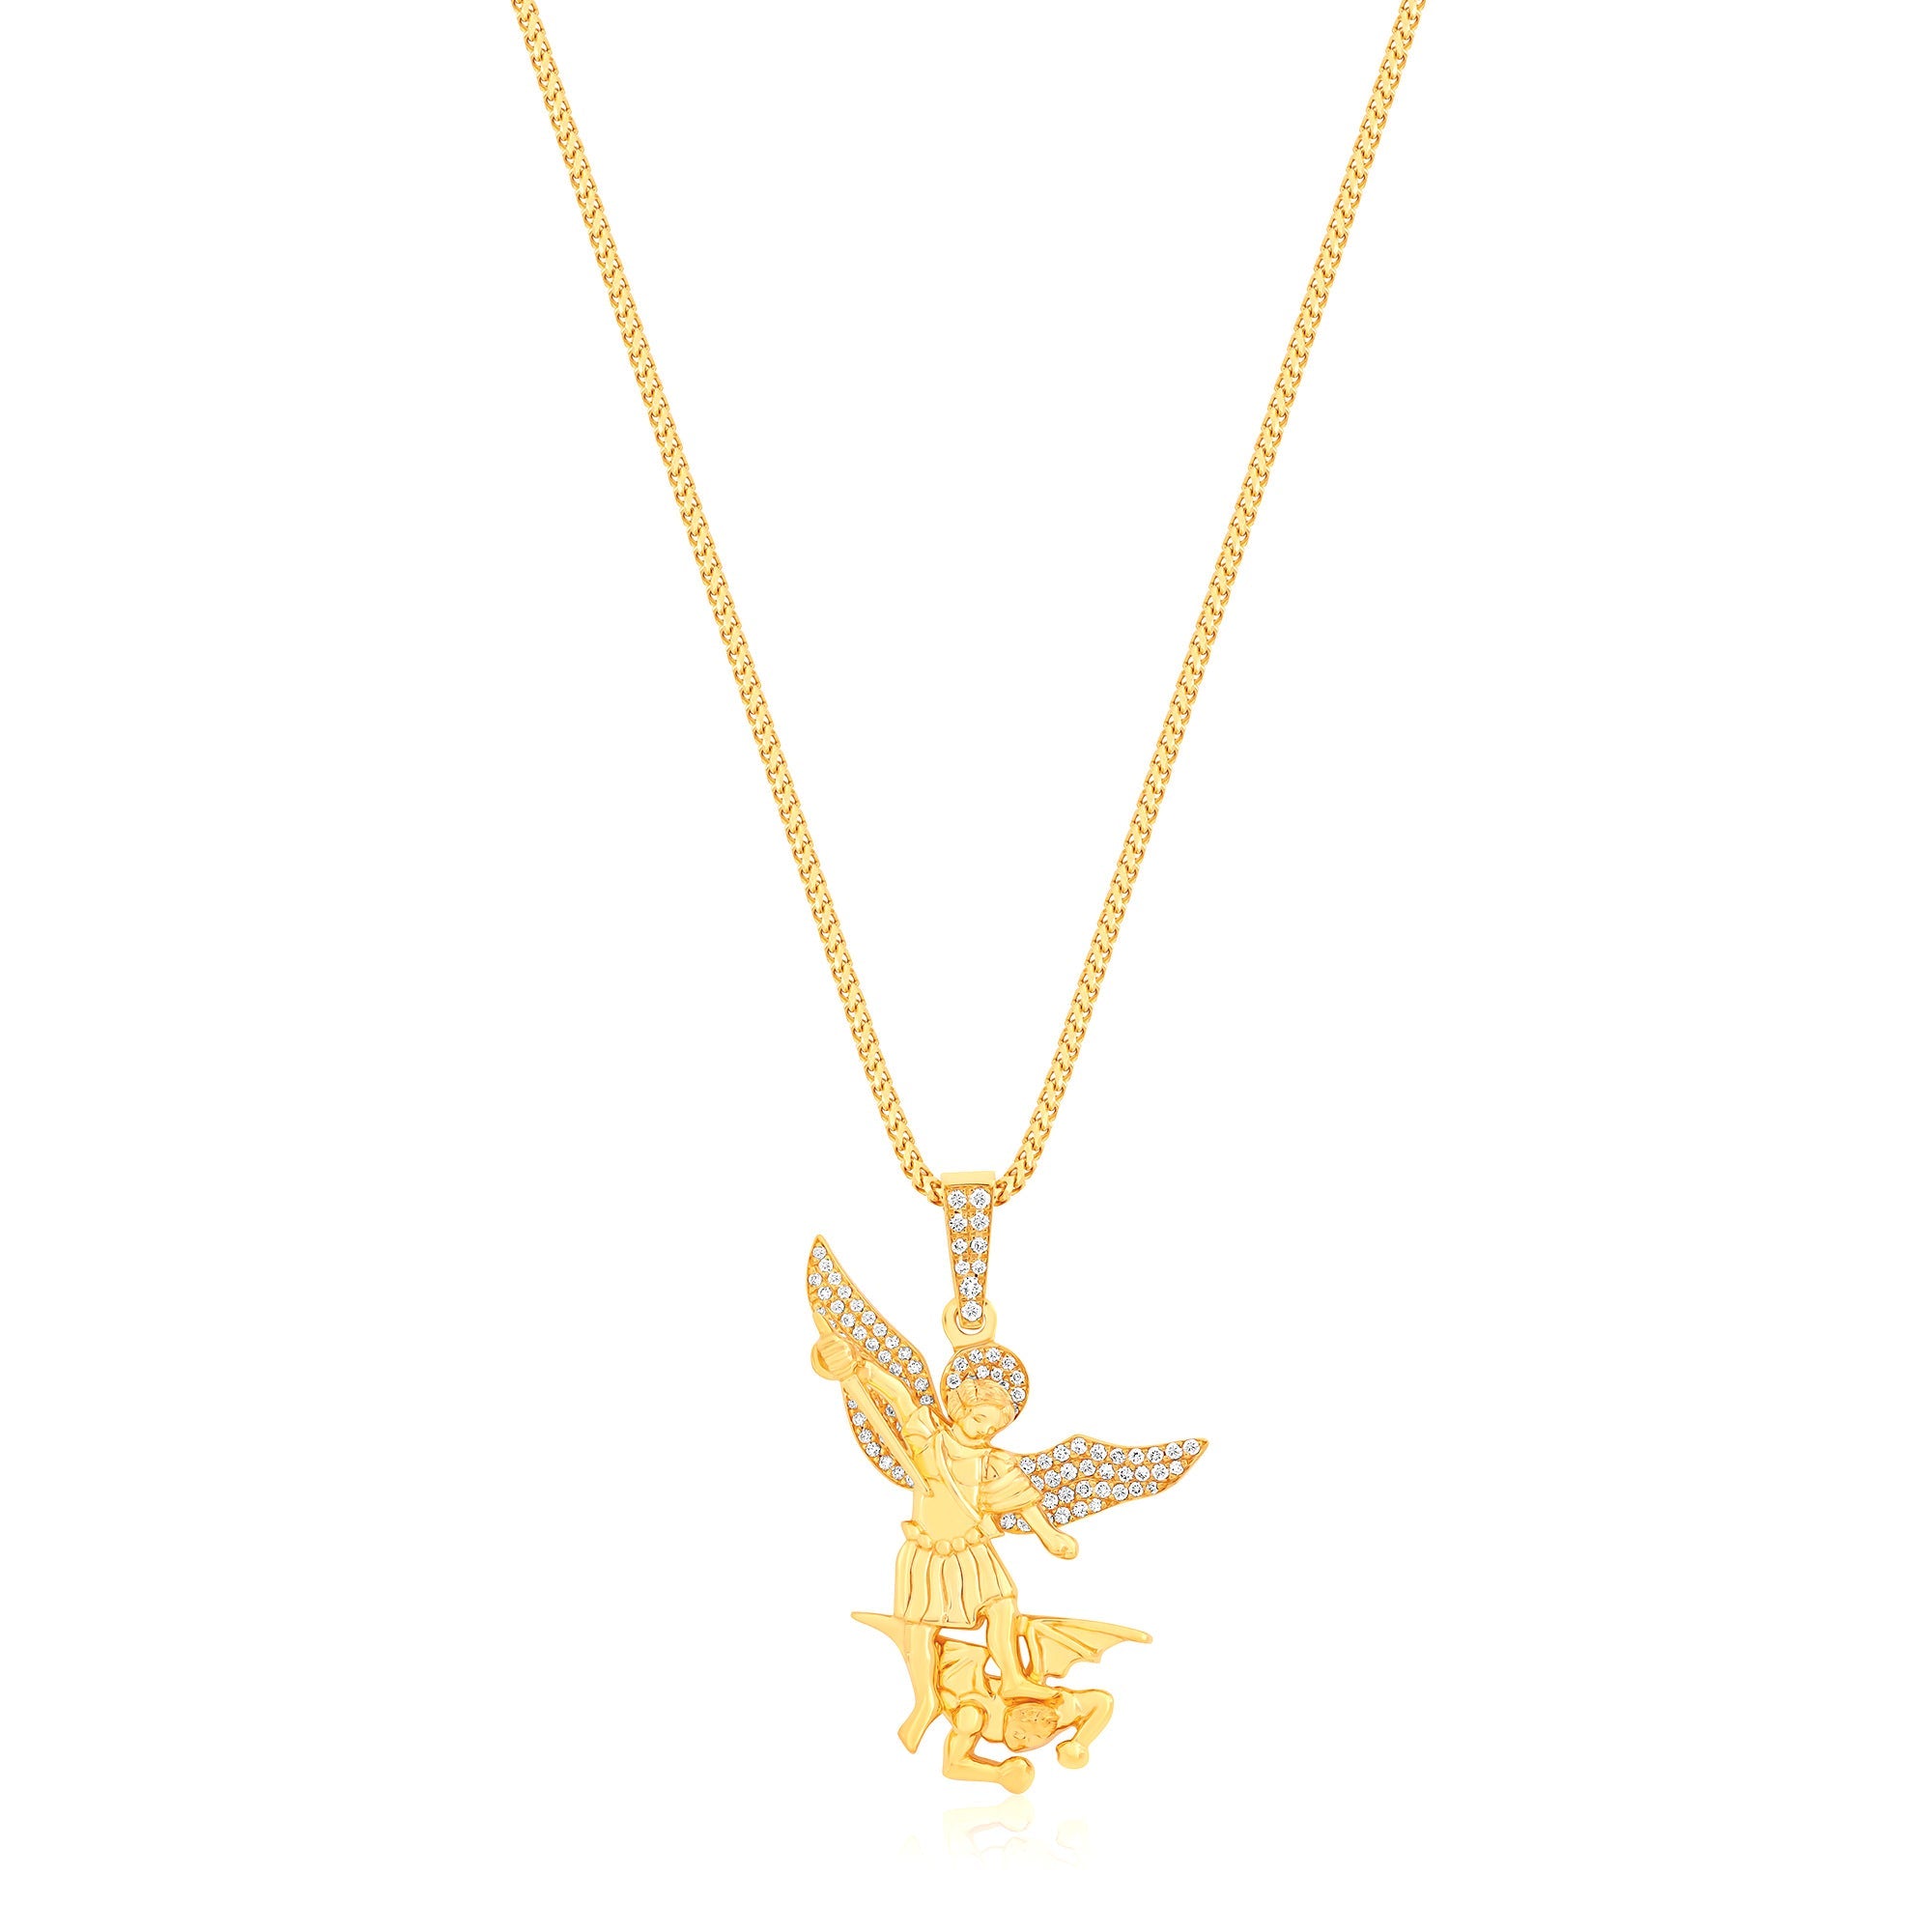 Micro Saint Michael Arch Angel Piece (Partially Iced) (14K YELLOW GOLD) - IF & Co. Custom Jewelers